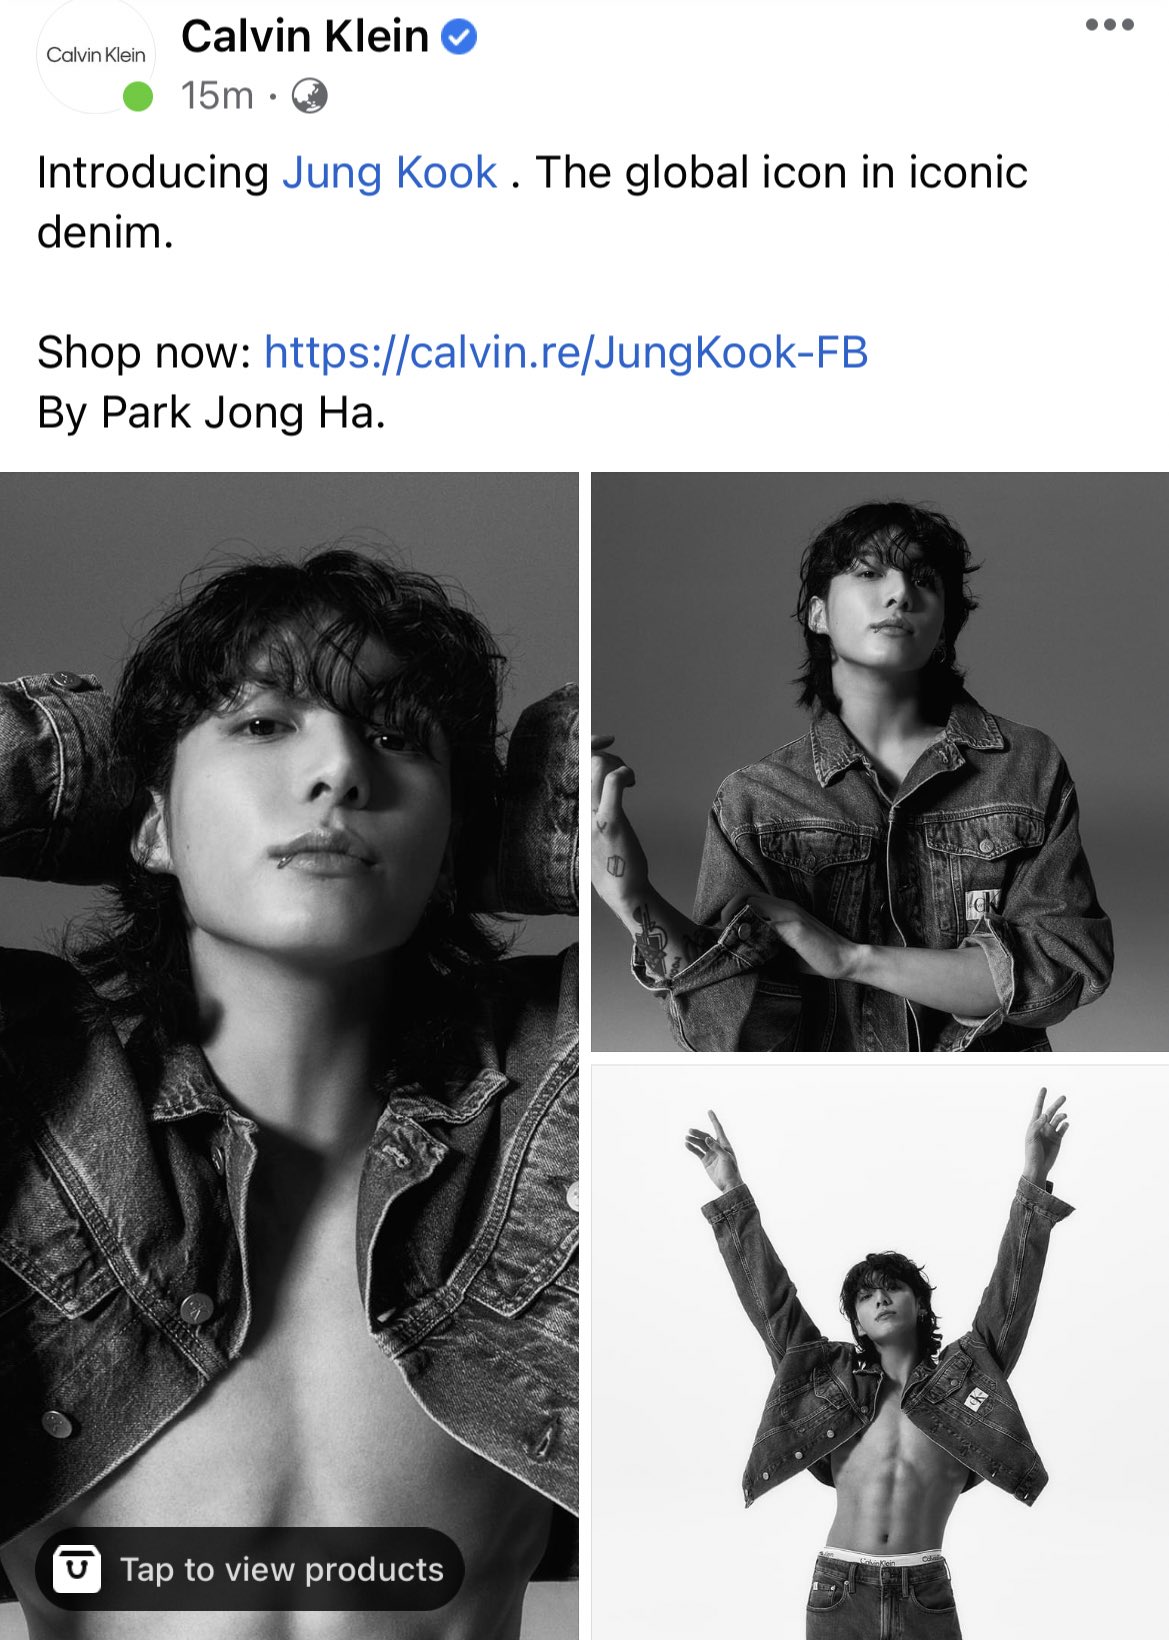 Introducing Jung Kook. The global icon in iconic denim. By